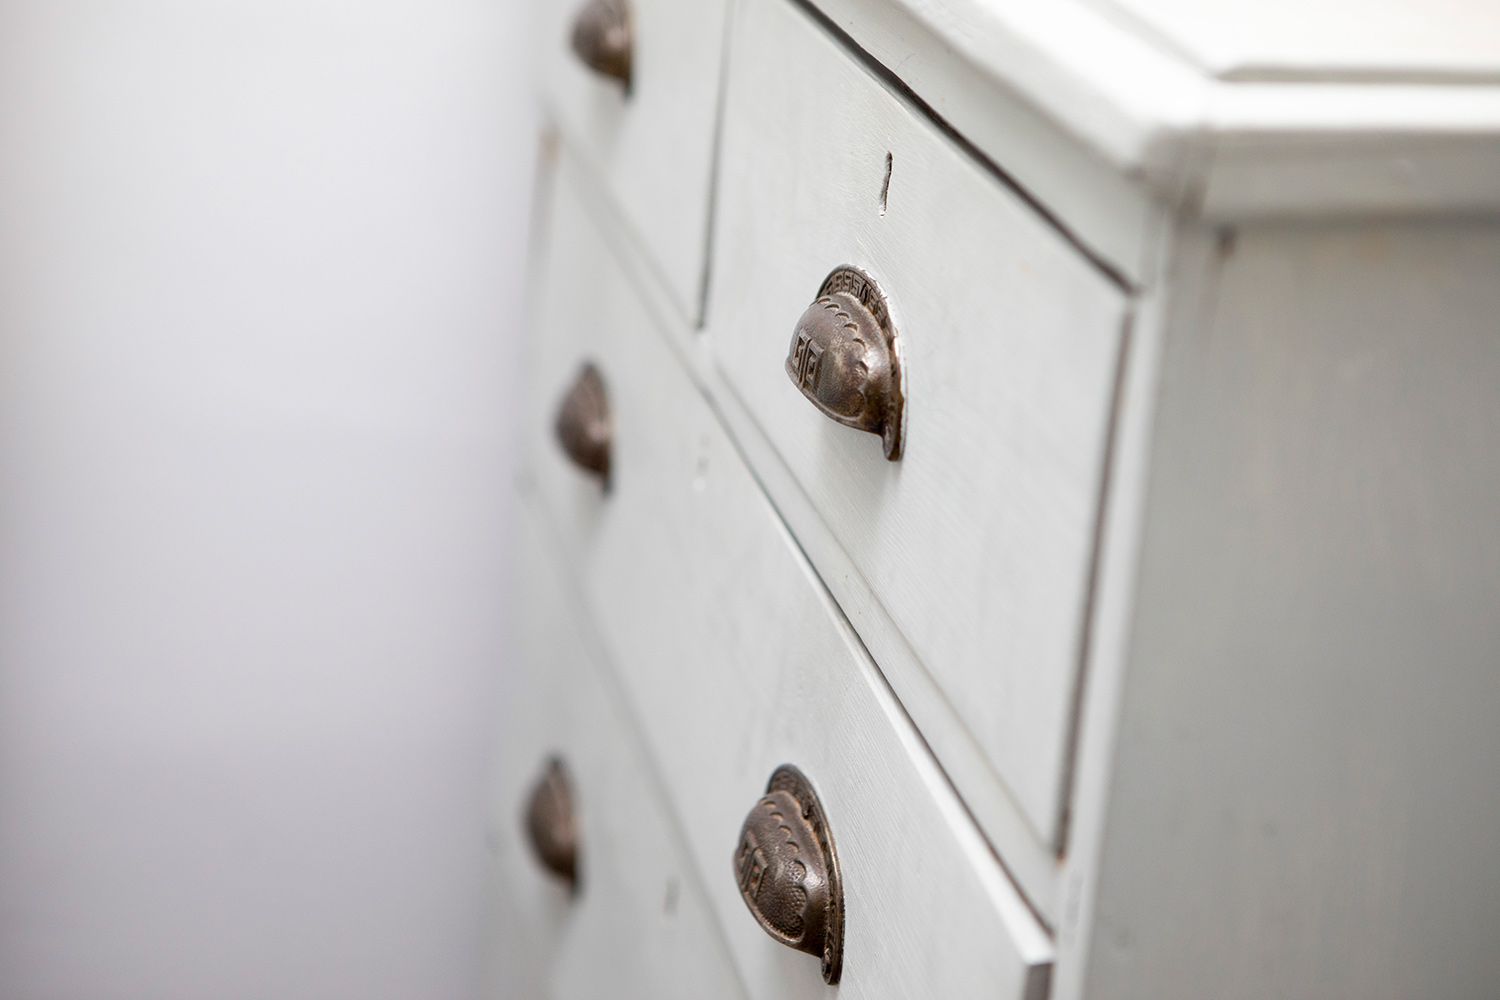 How To Prevent Dresser Drawers From Falling Out